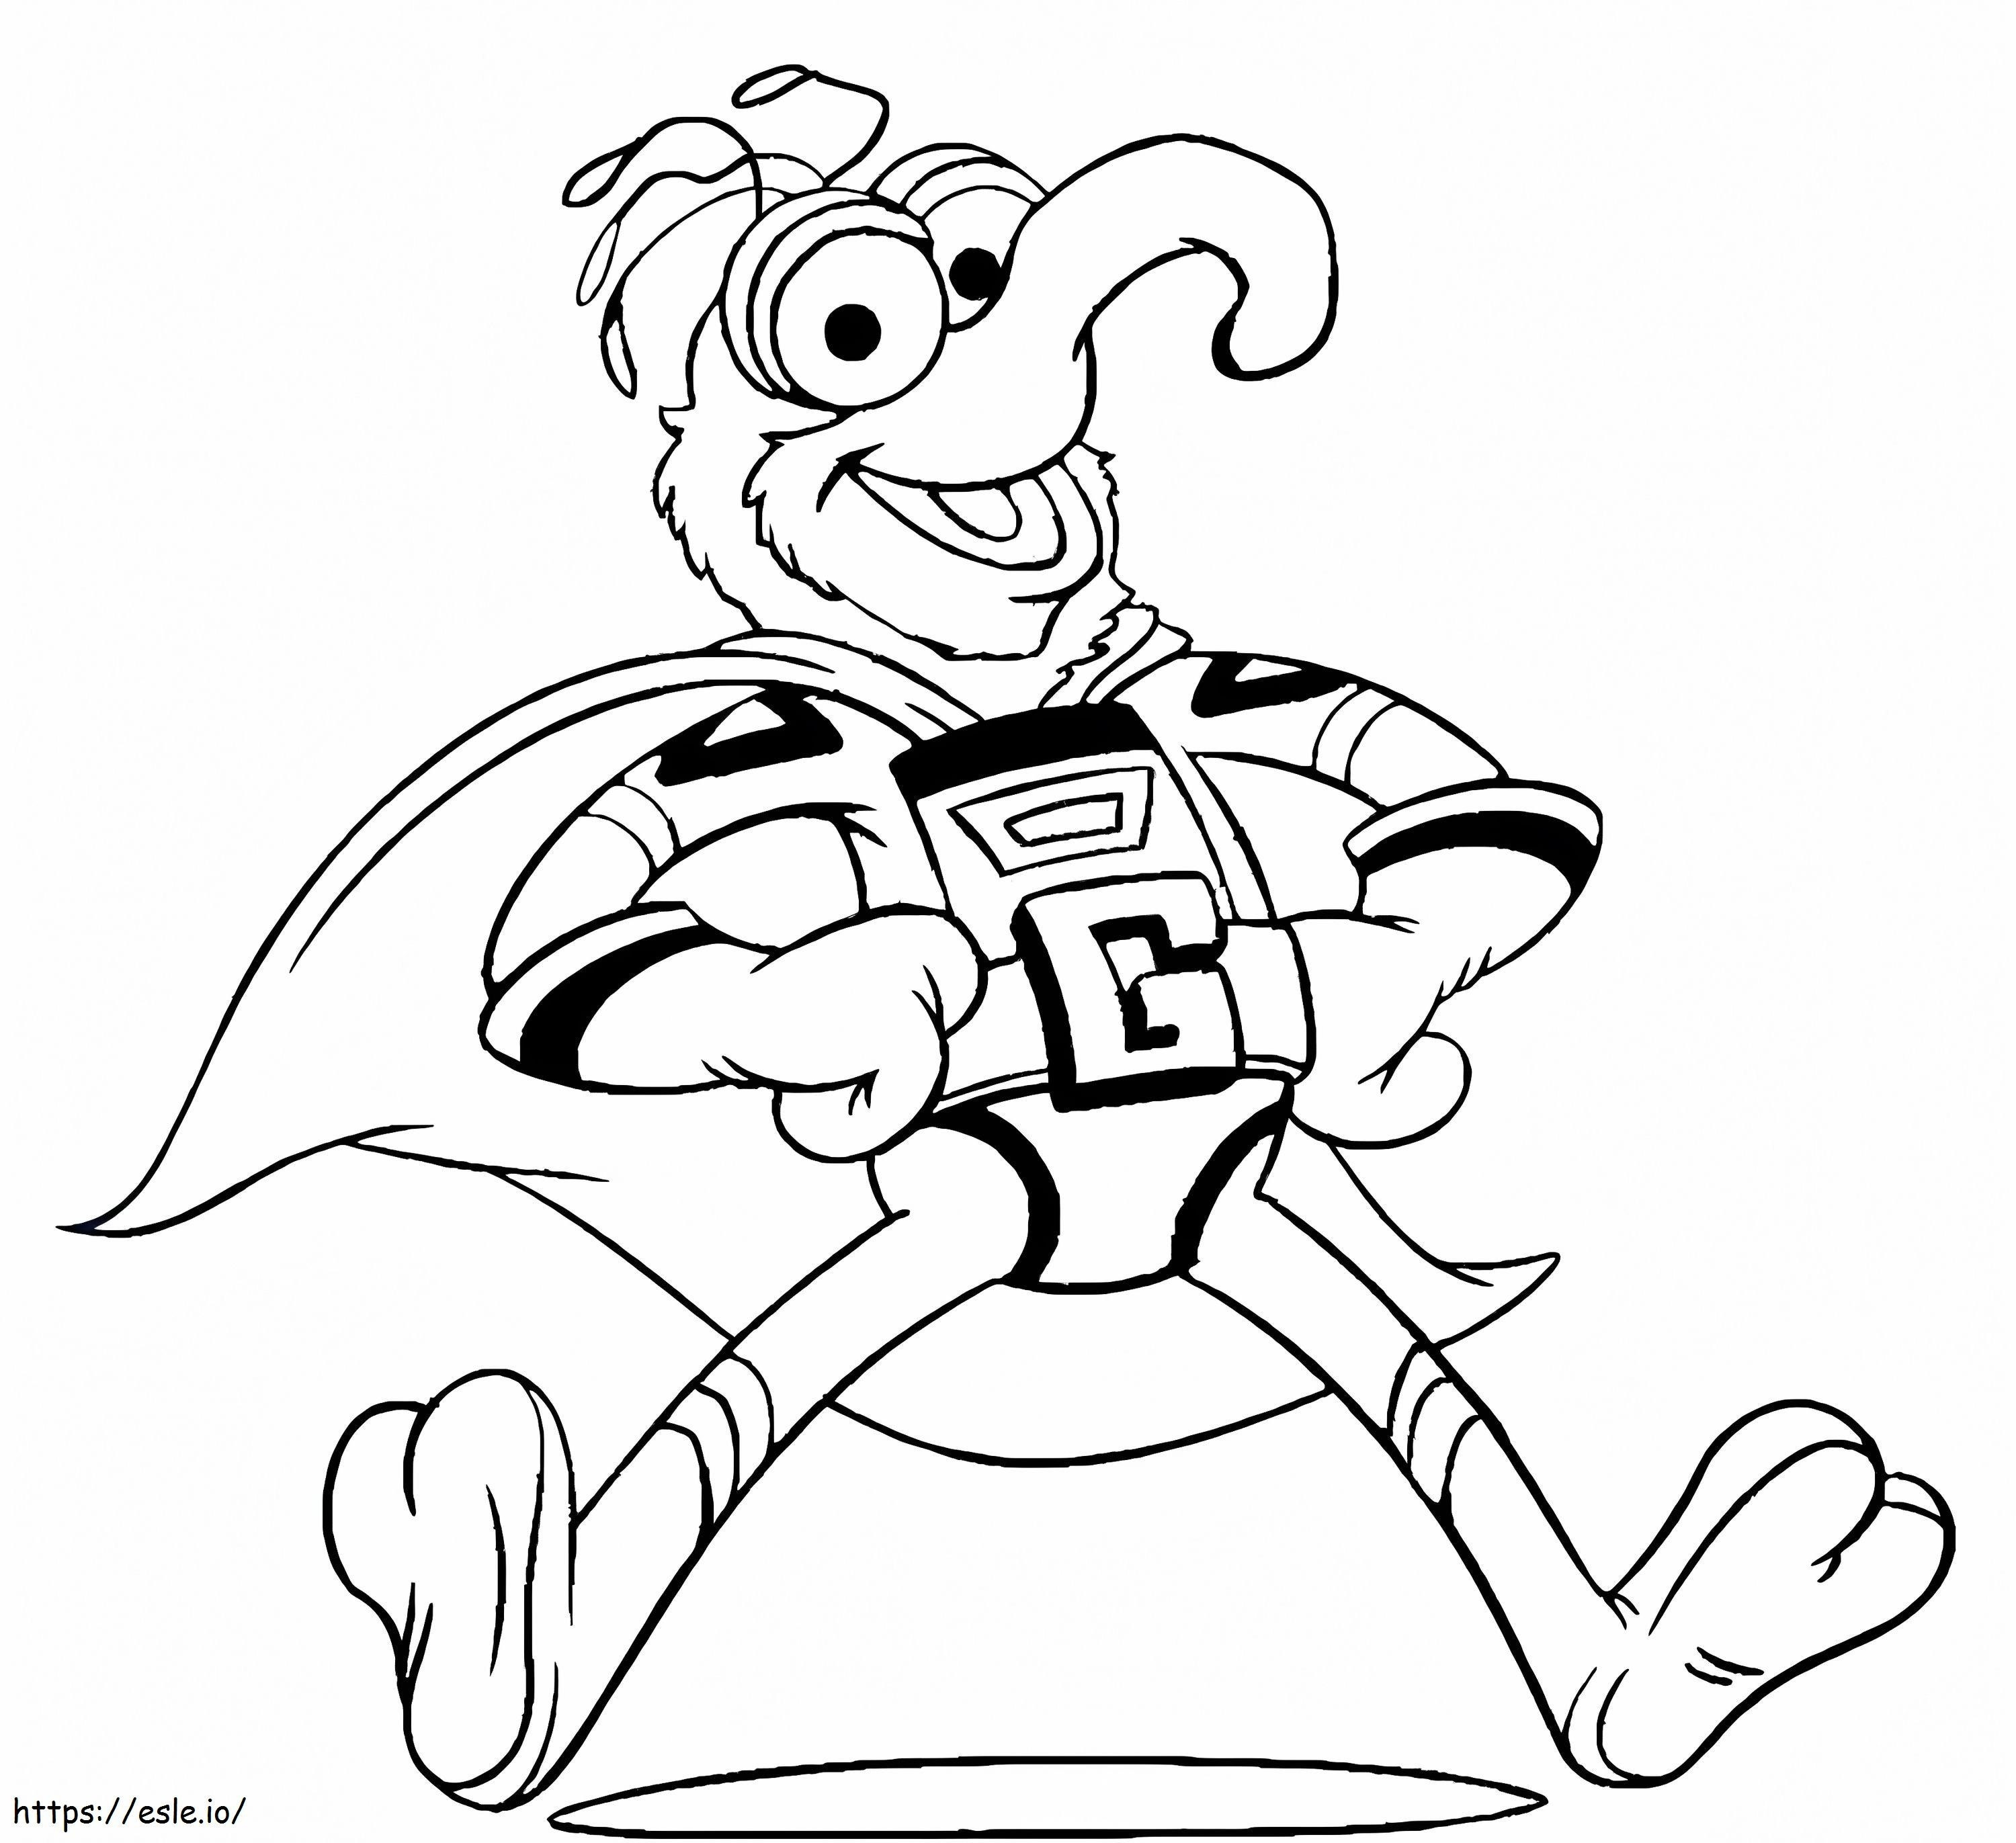 Super Gonzo coloring page